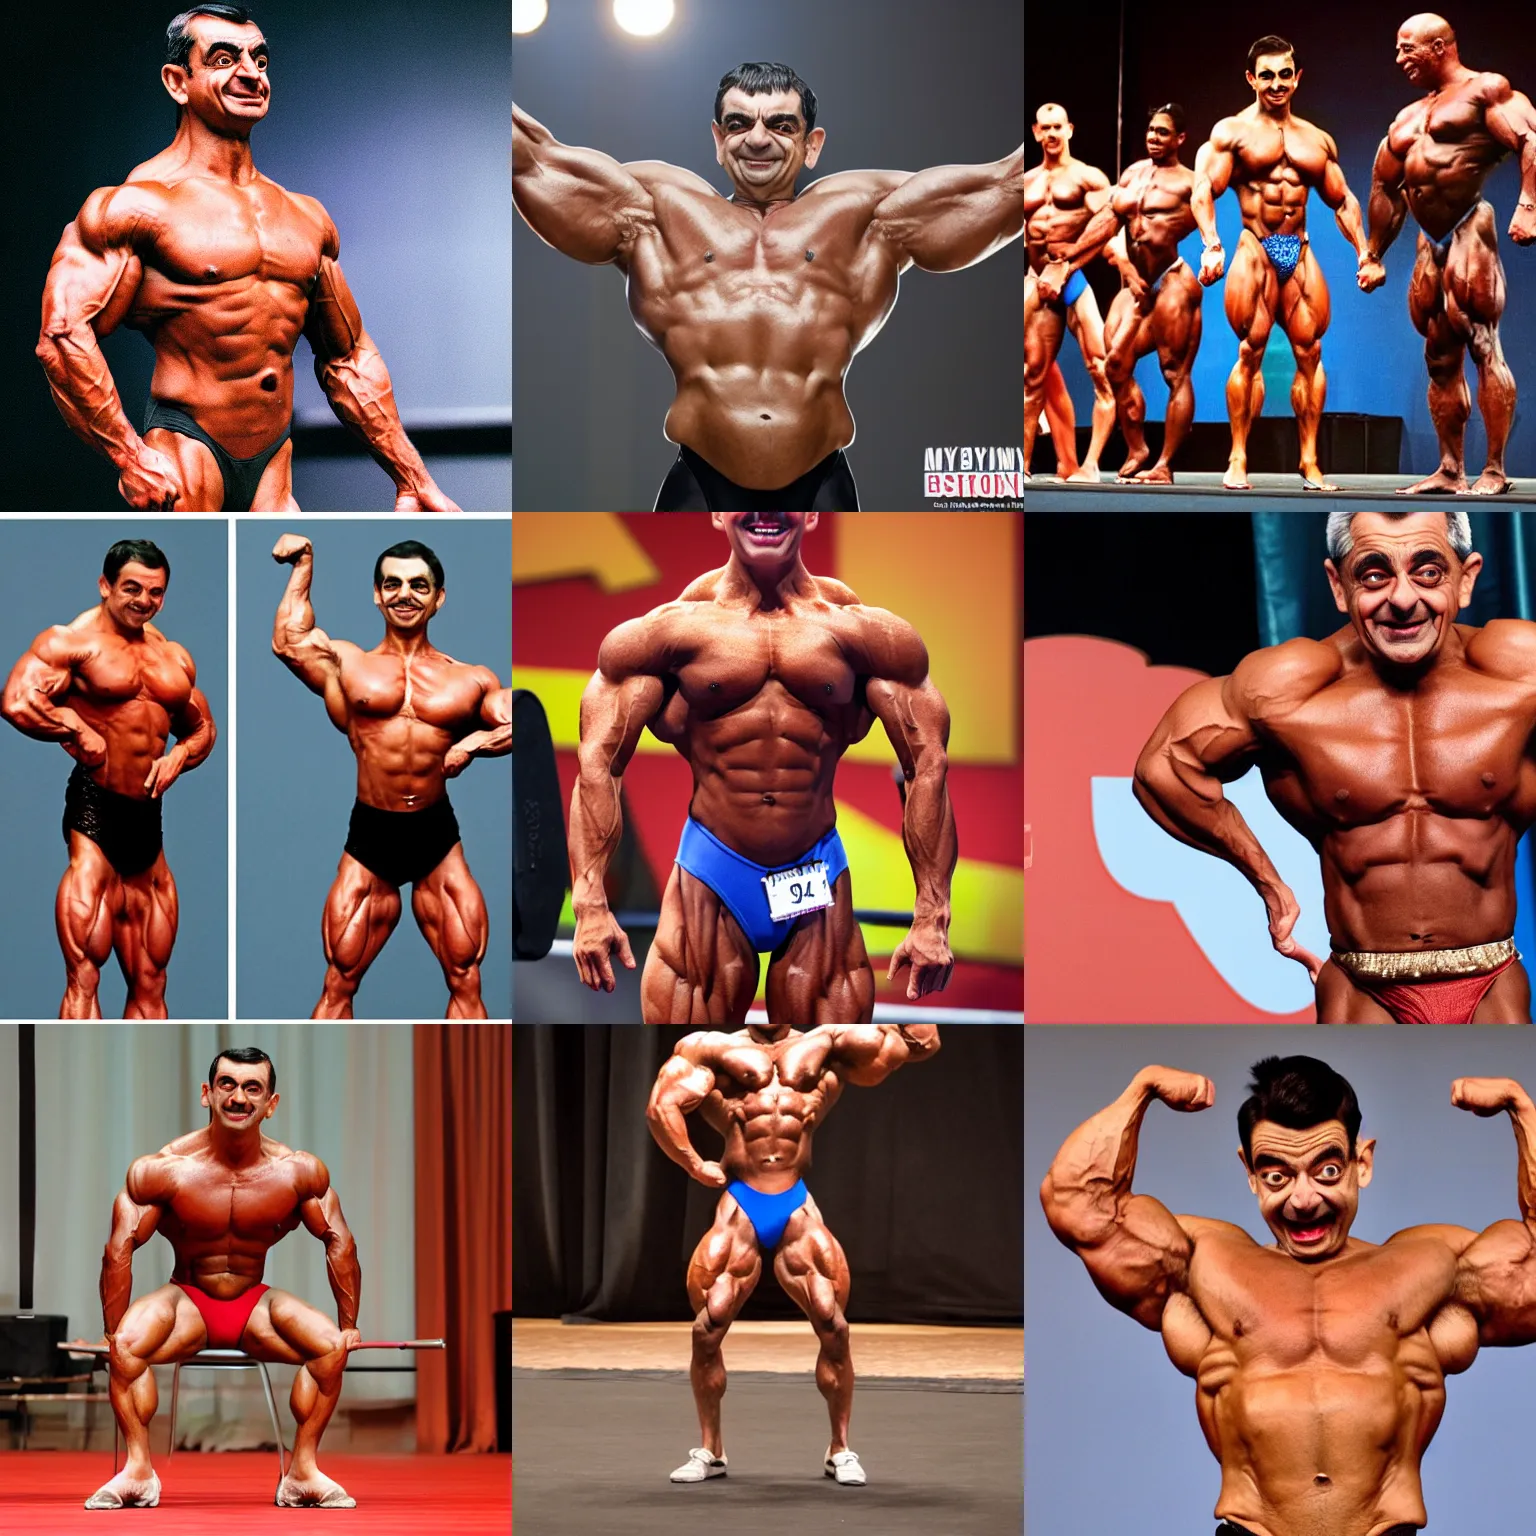 Men's classic physique posing suit meets NPC and IFBB guidlines